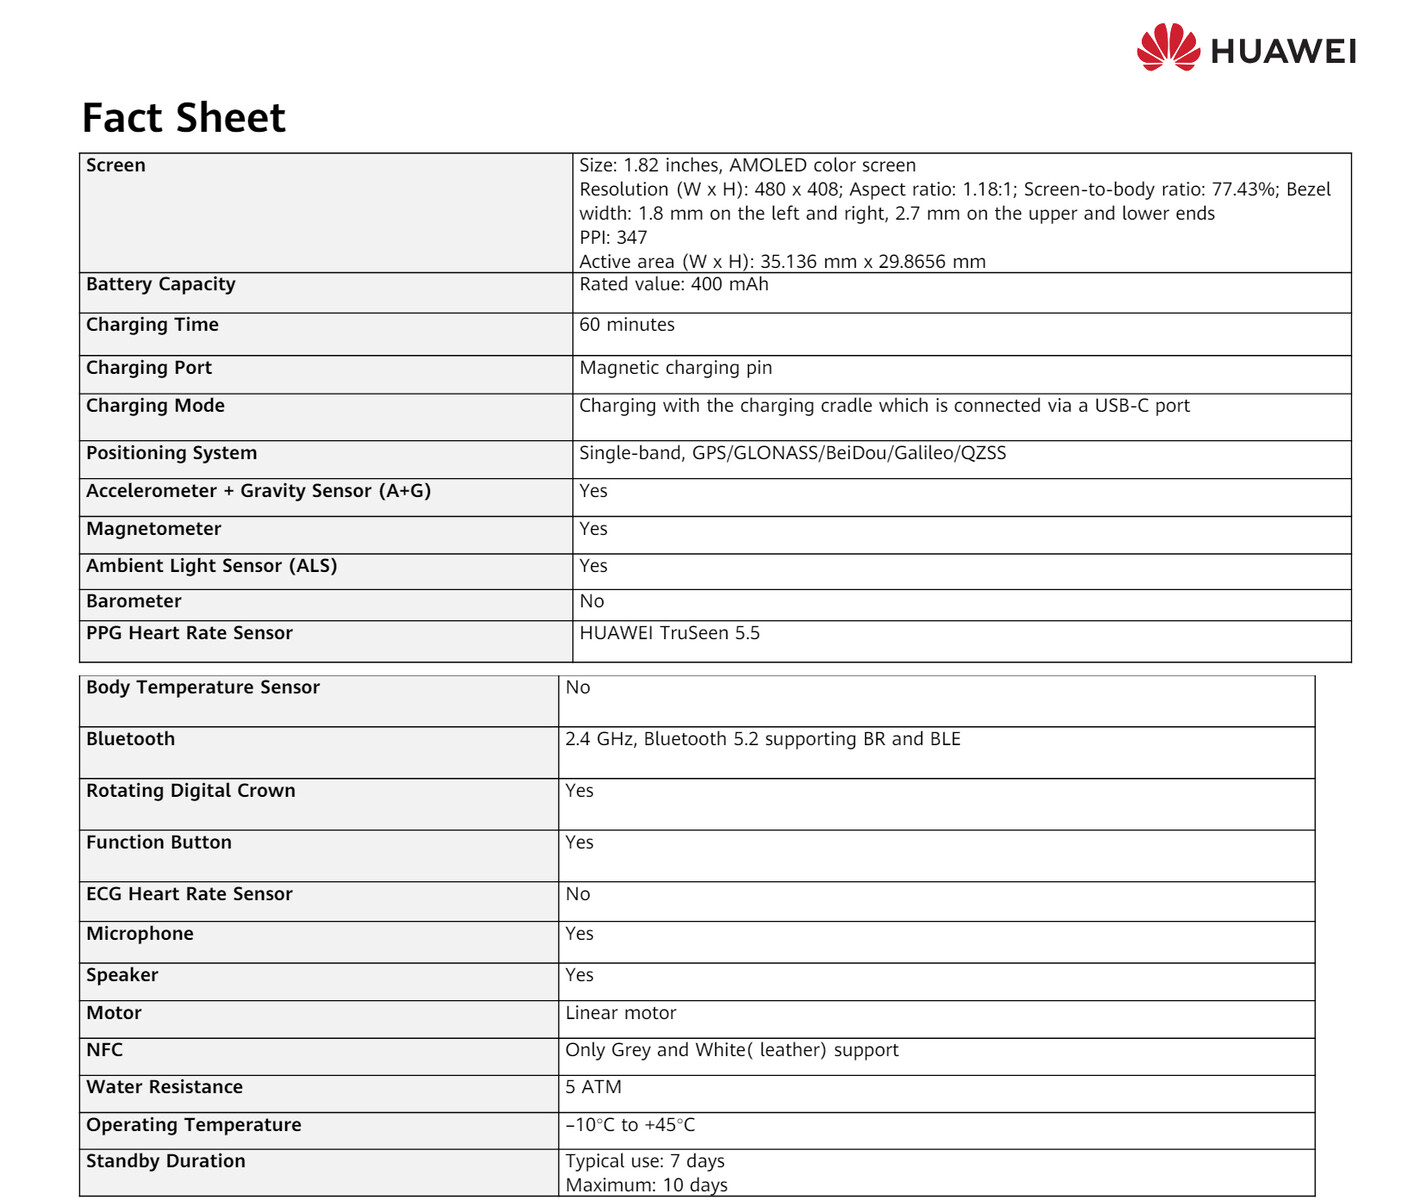 Complete spec sheet (Image source: Huawei)